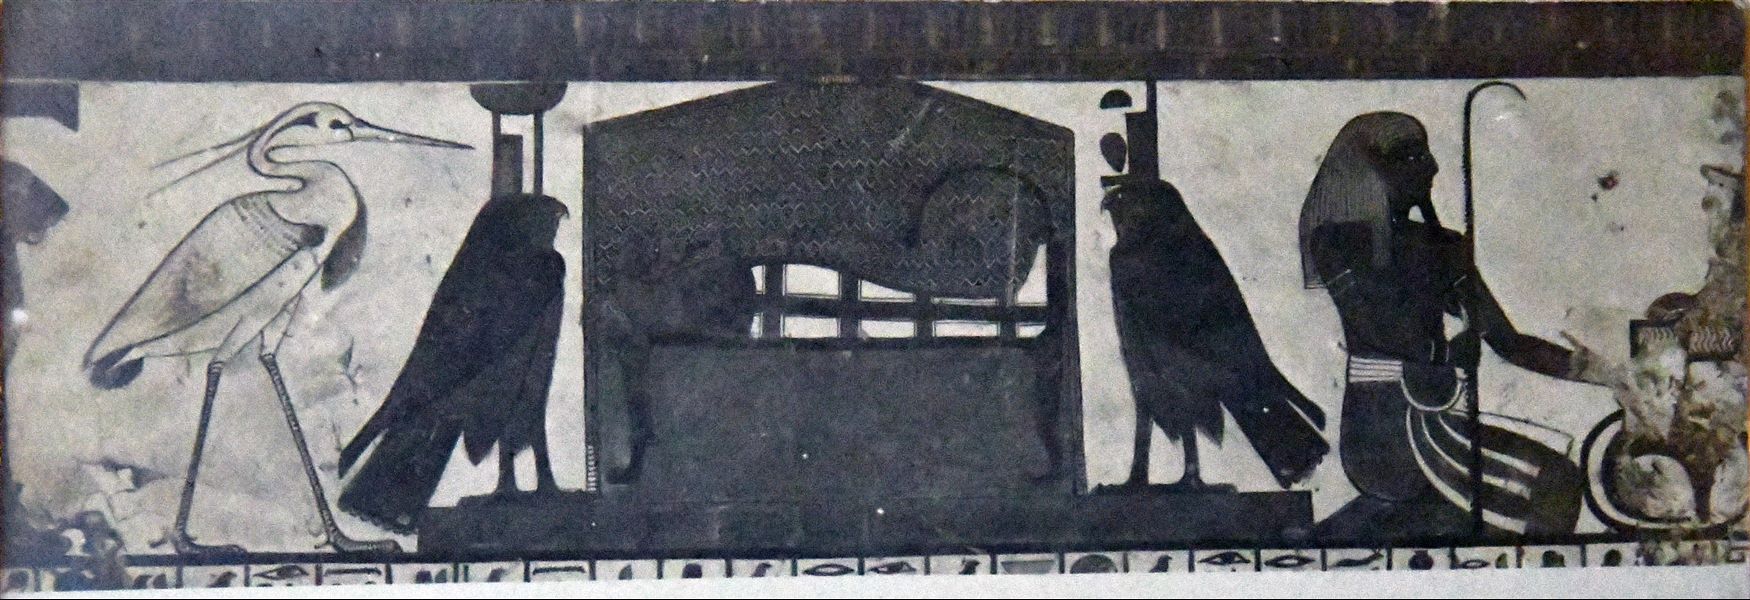 Photograph taken inside the tomb of Queen Nefertari (QV66). West wall of the antechamber, upper register, scene 3. The mummy of the Queen is placed on a bed between two falcons, representing the goddesses Nephthys and Isis. On the left, there is the Benu bird, symbol of the incarnation of Ra’s soul. Angelo Sesana Archive. 